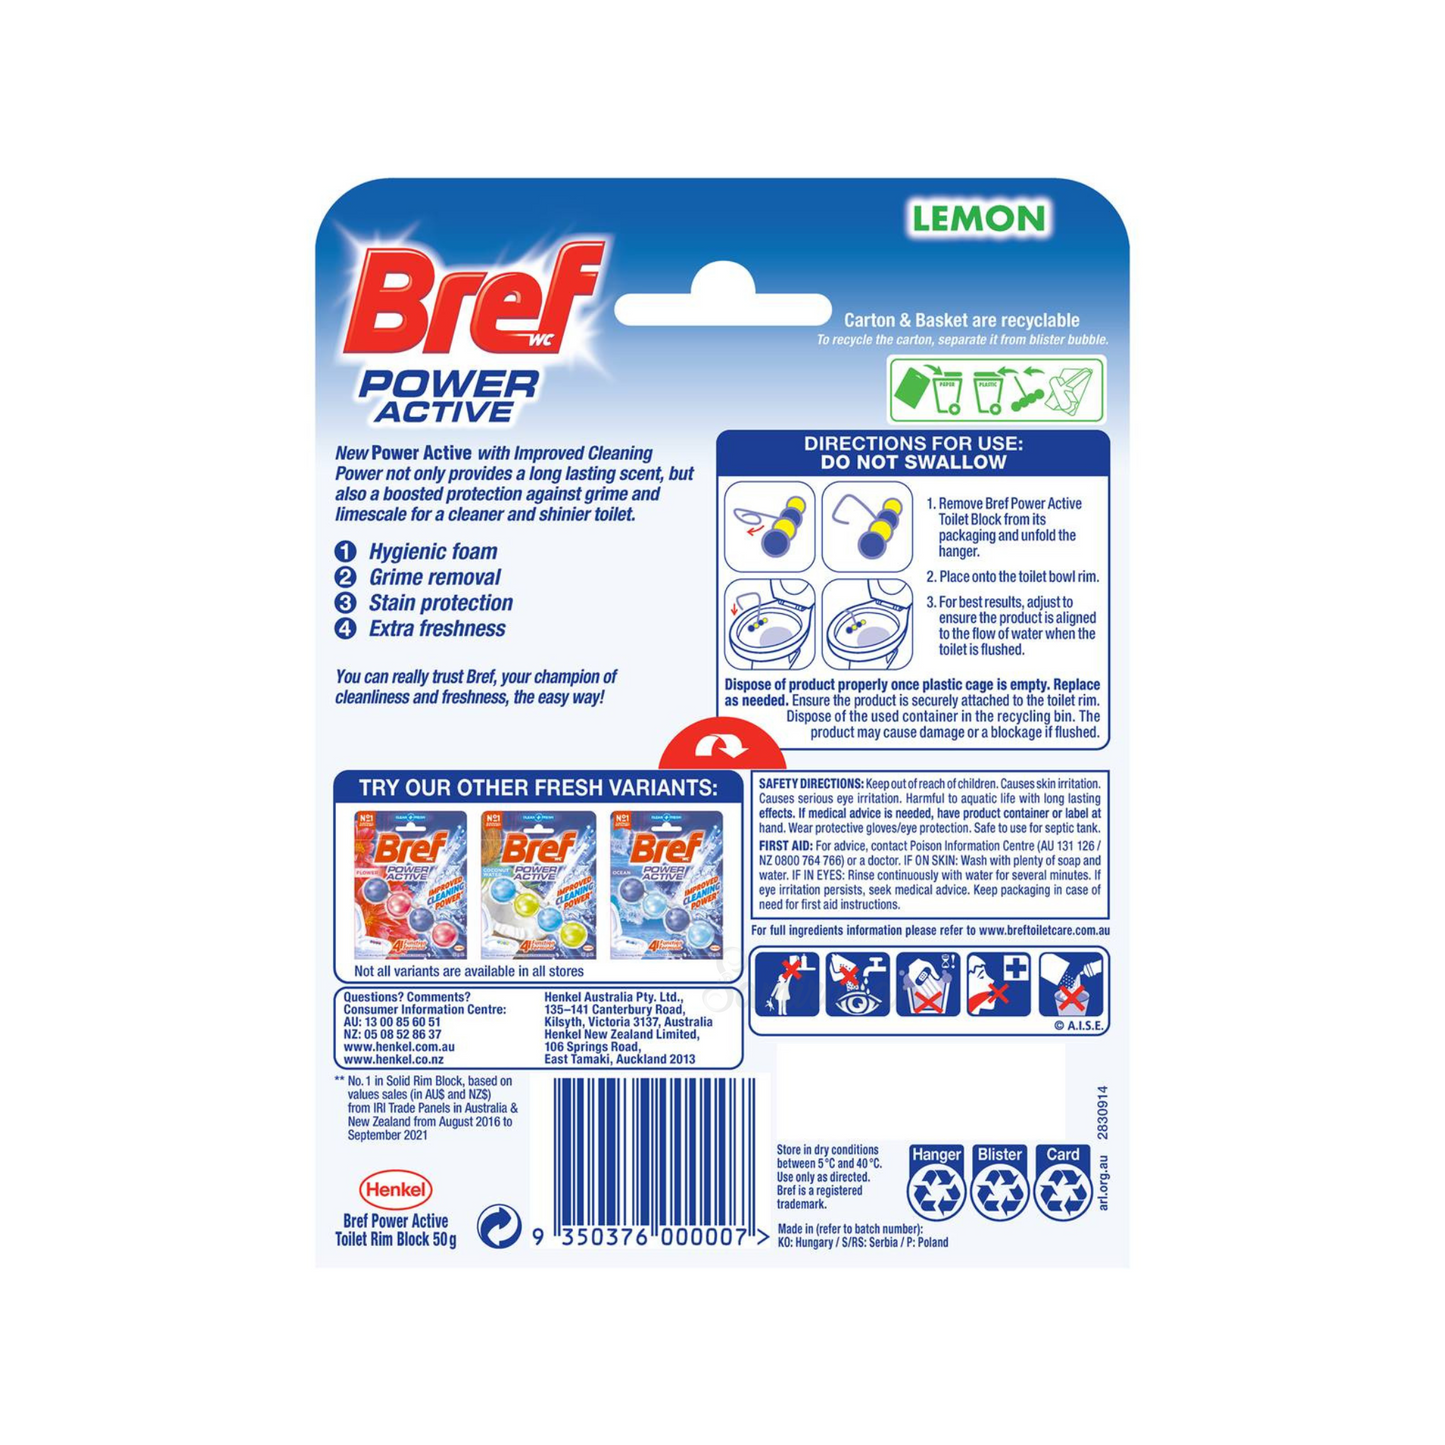 Bref Power Active Toilet Cleaner Block fits under the toilet rim & cleans with combined actions of hygienic foam, grime removal, stain protection & extra fragrance. Best imported foreign Australian Aussie genuine authentic premium quality real household cleaning hygiene price in Dhaka Chittagong Sylhet Bangladesh.